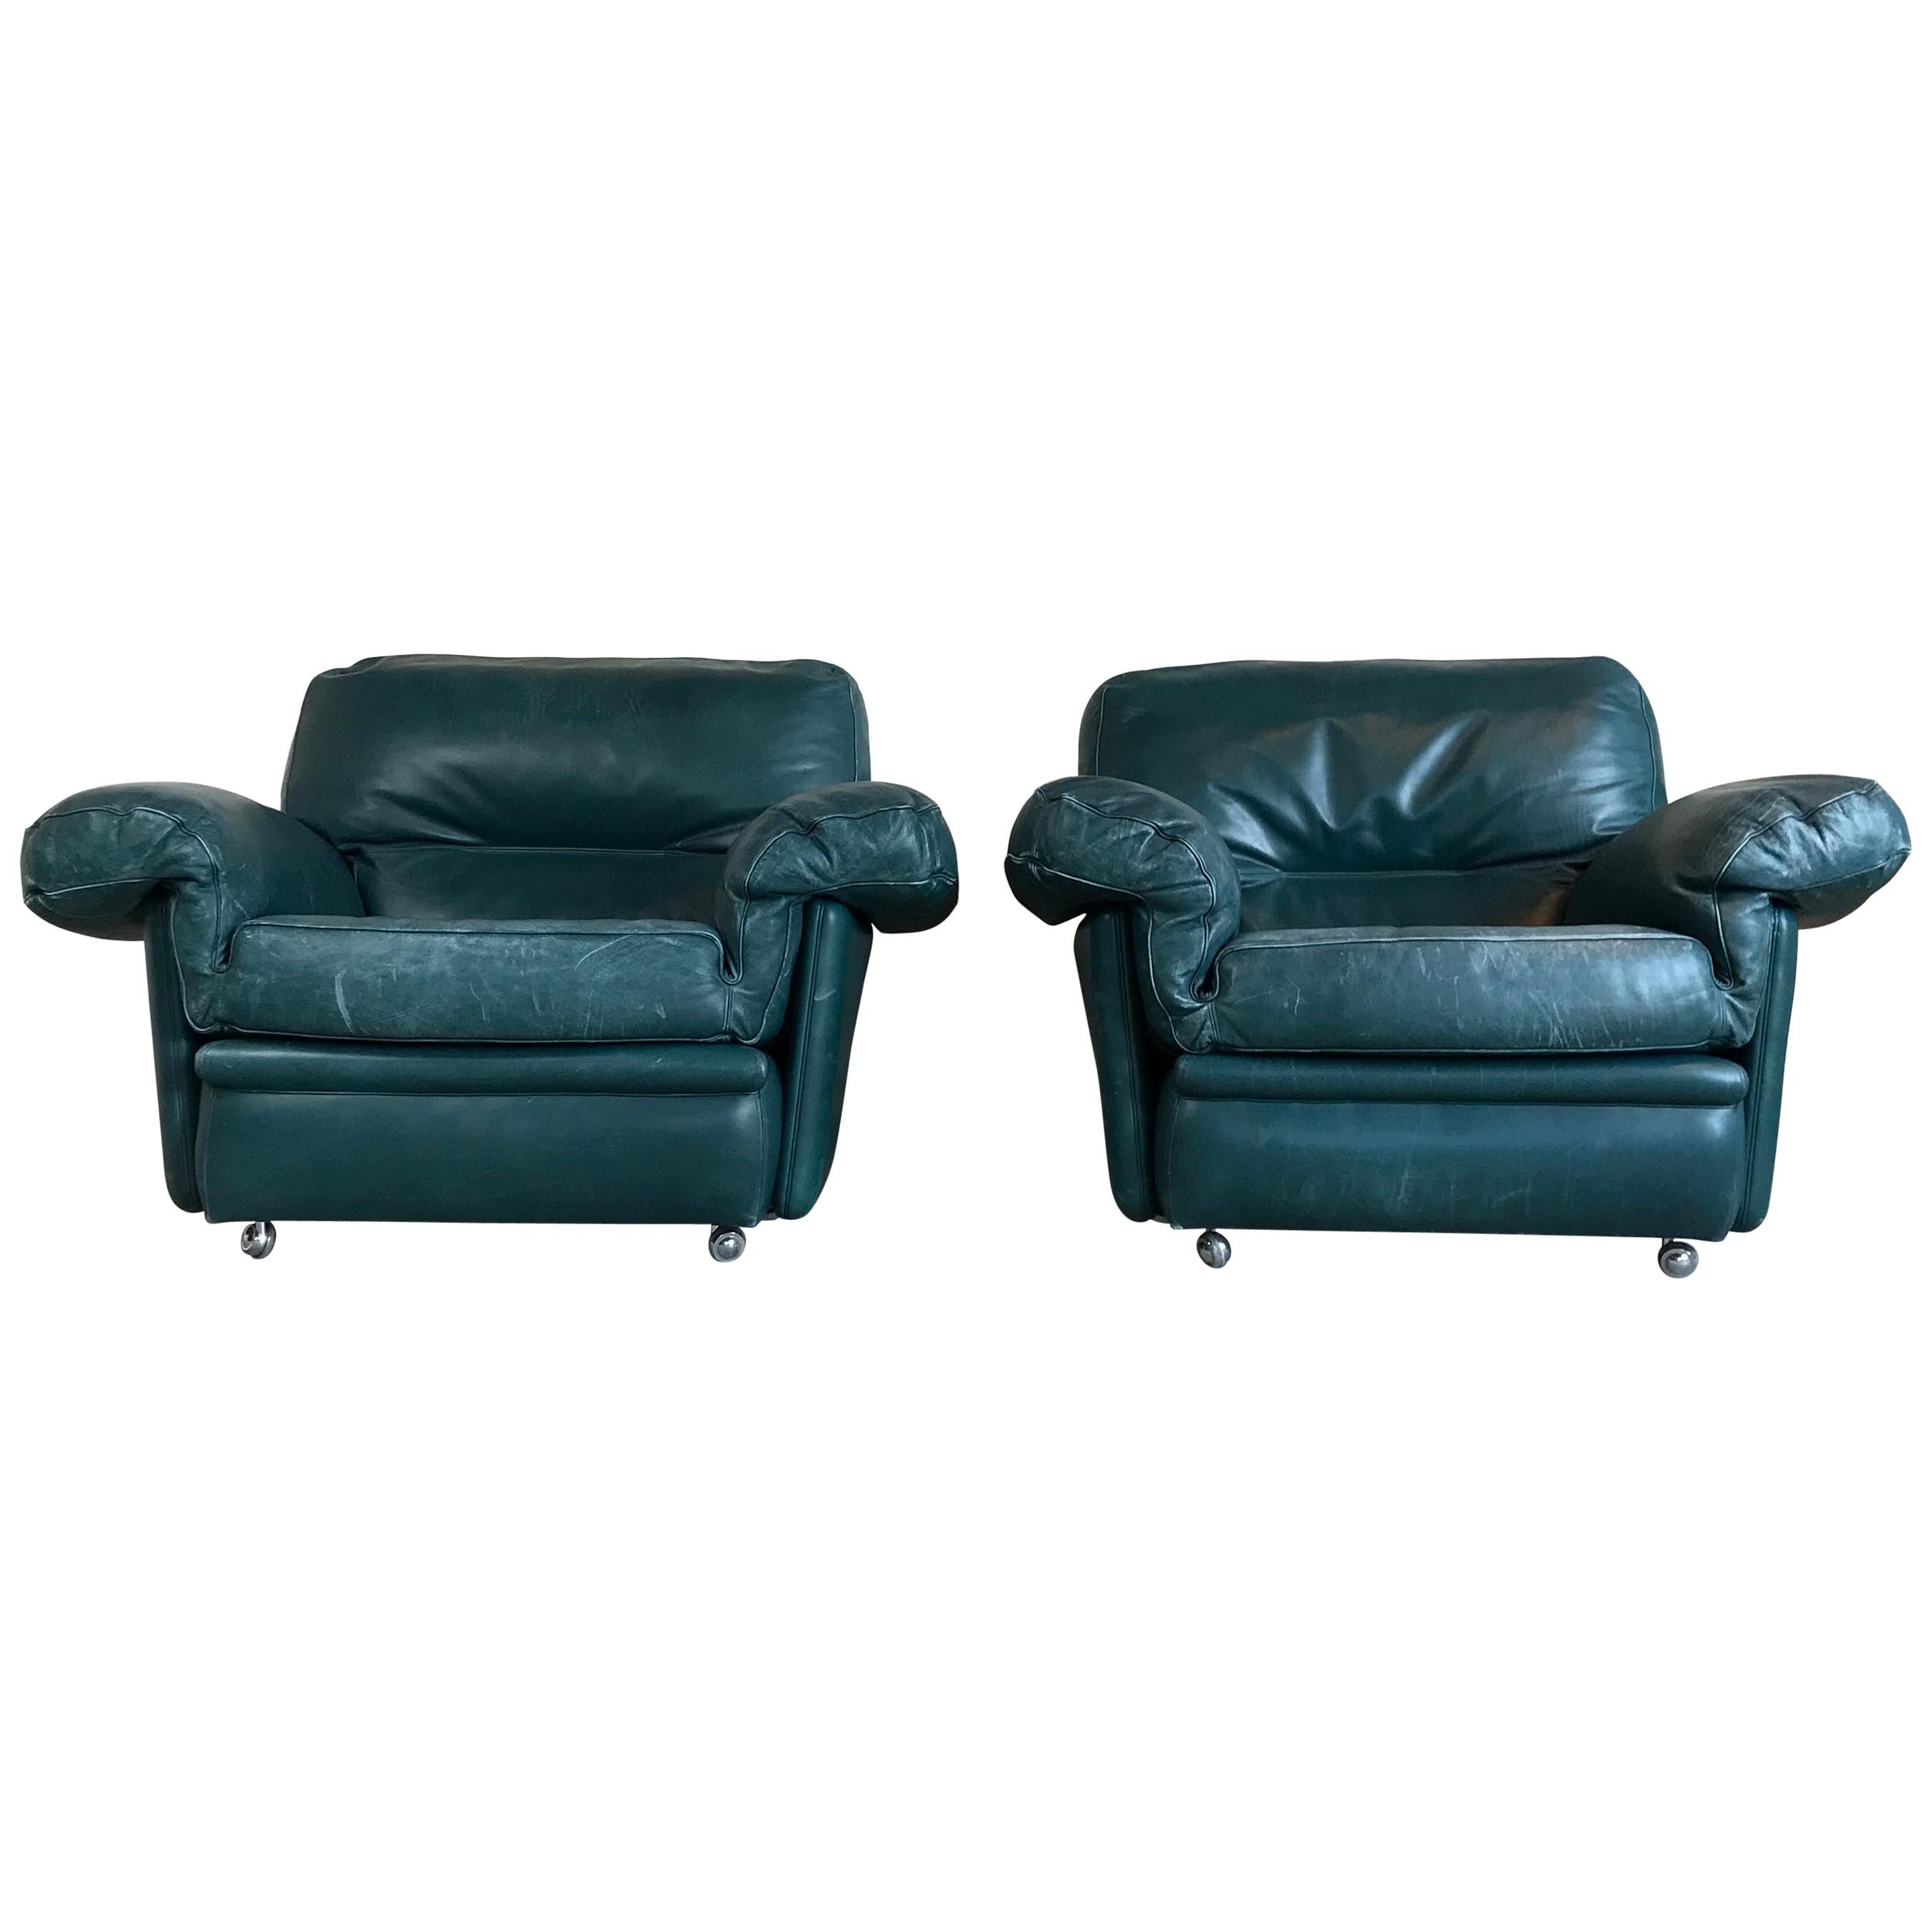 Pair of Midcentury Lounge Chairs by Poltrona Frau, Italy, 1970s